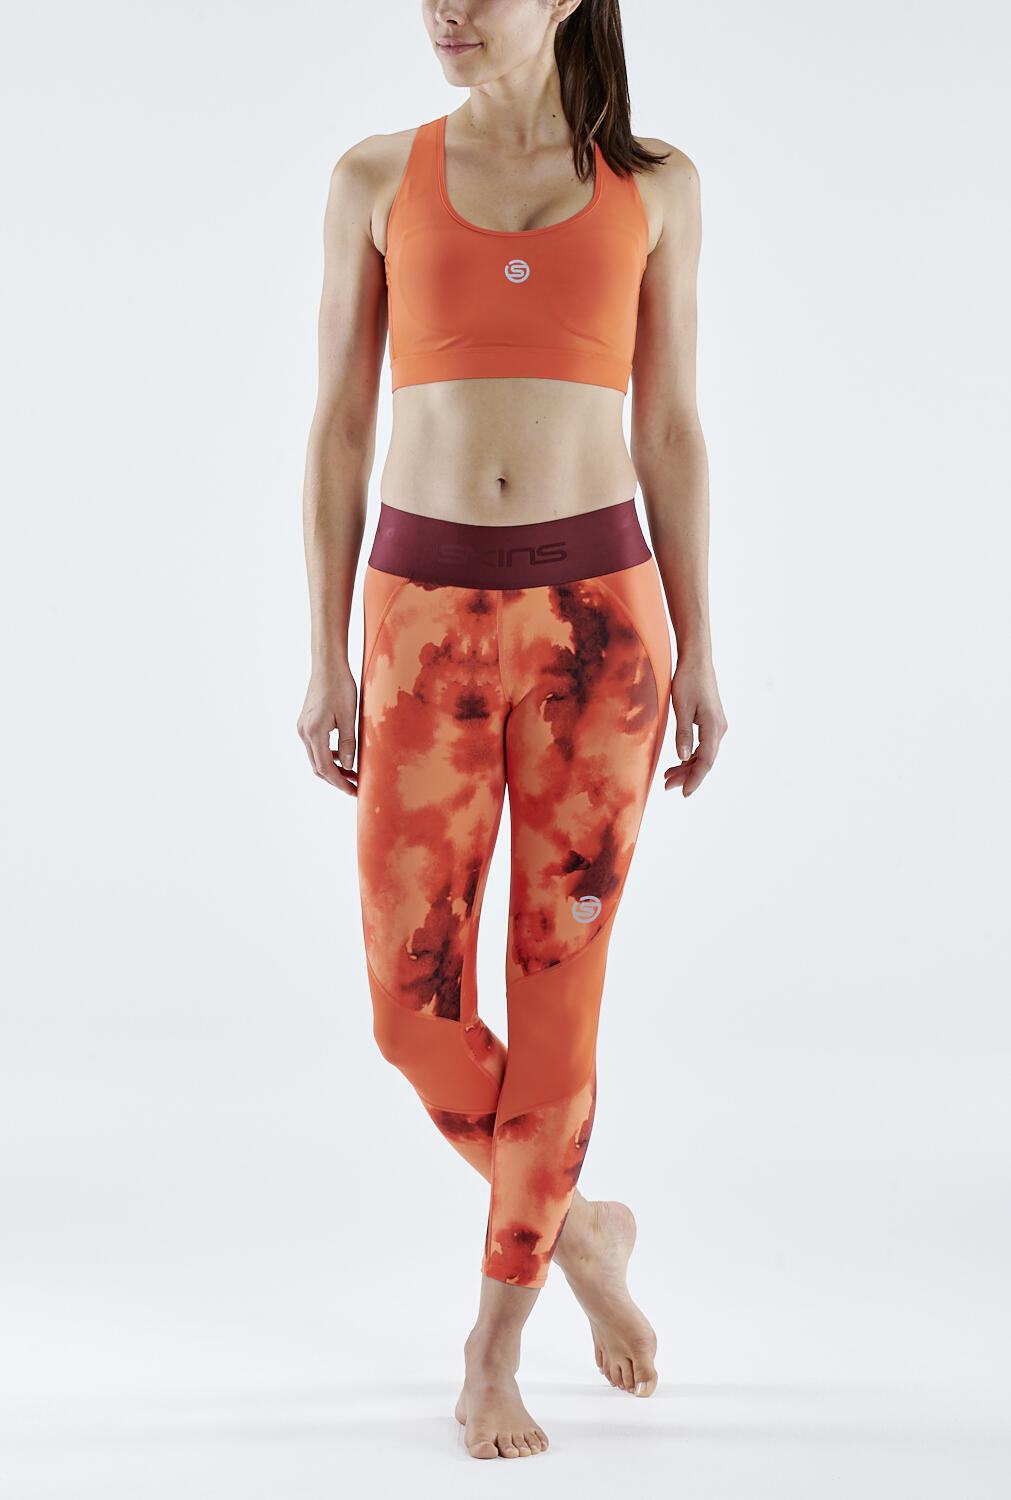 SKINS Series-3 Womens Long Tights - Spark Camo 5/5